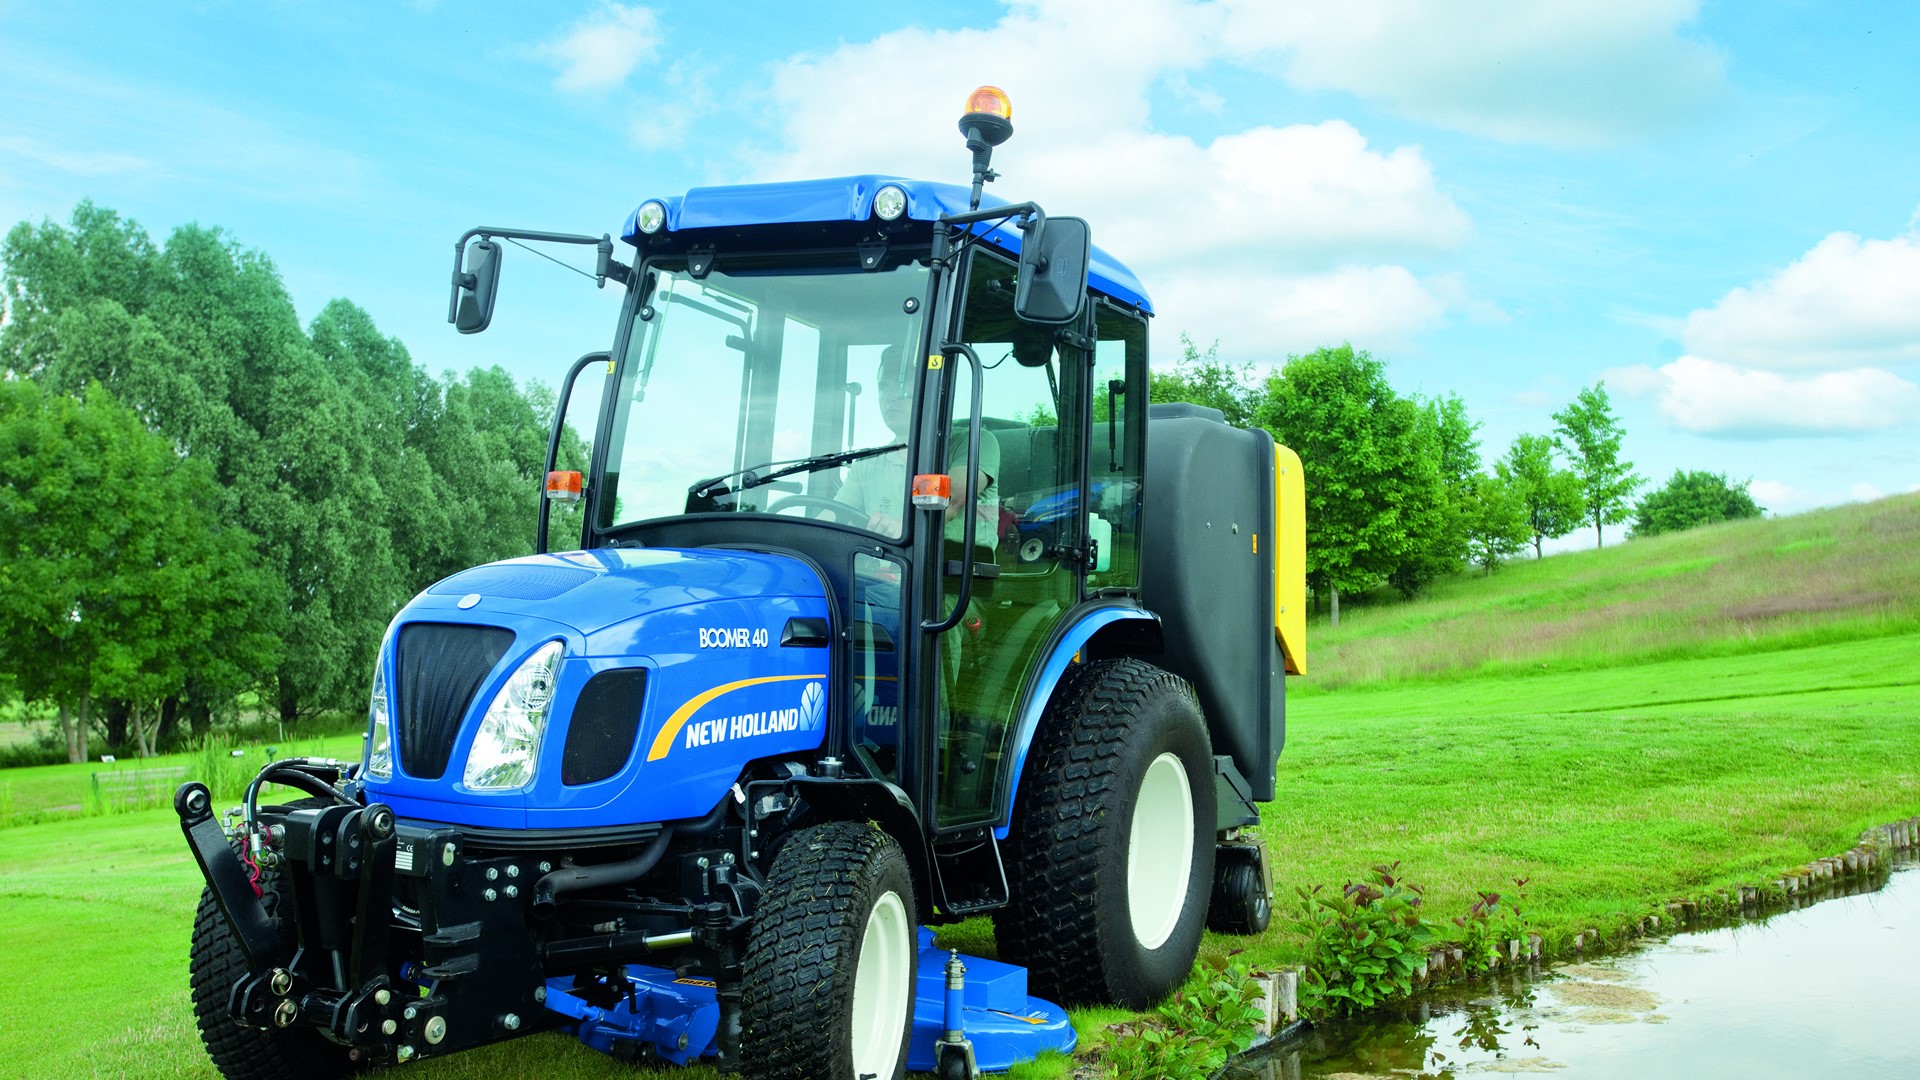 New Holland Boomer 40 compact tractor